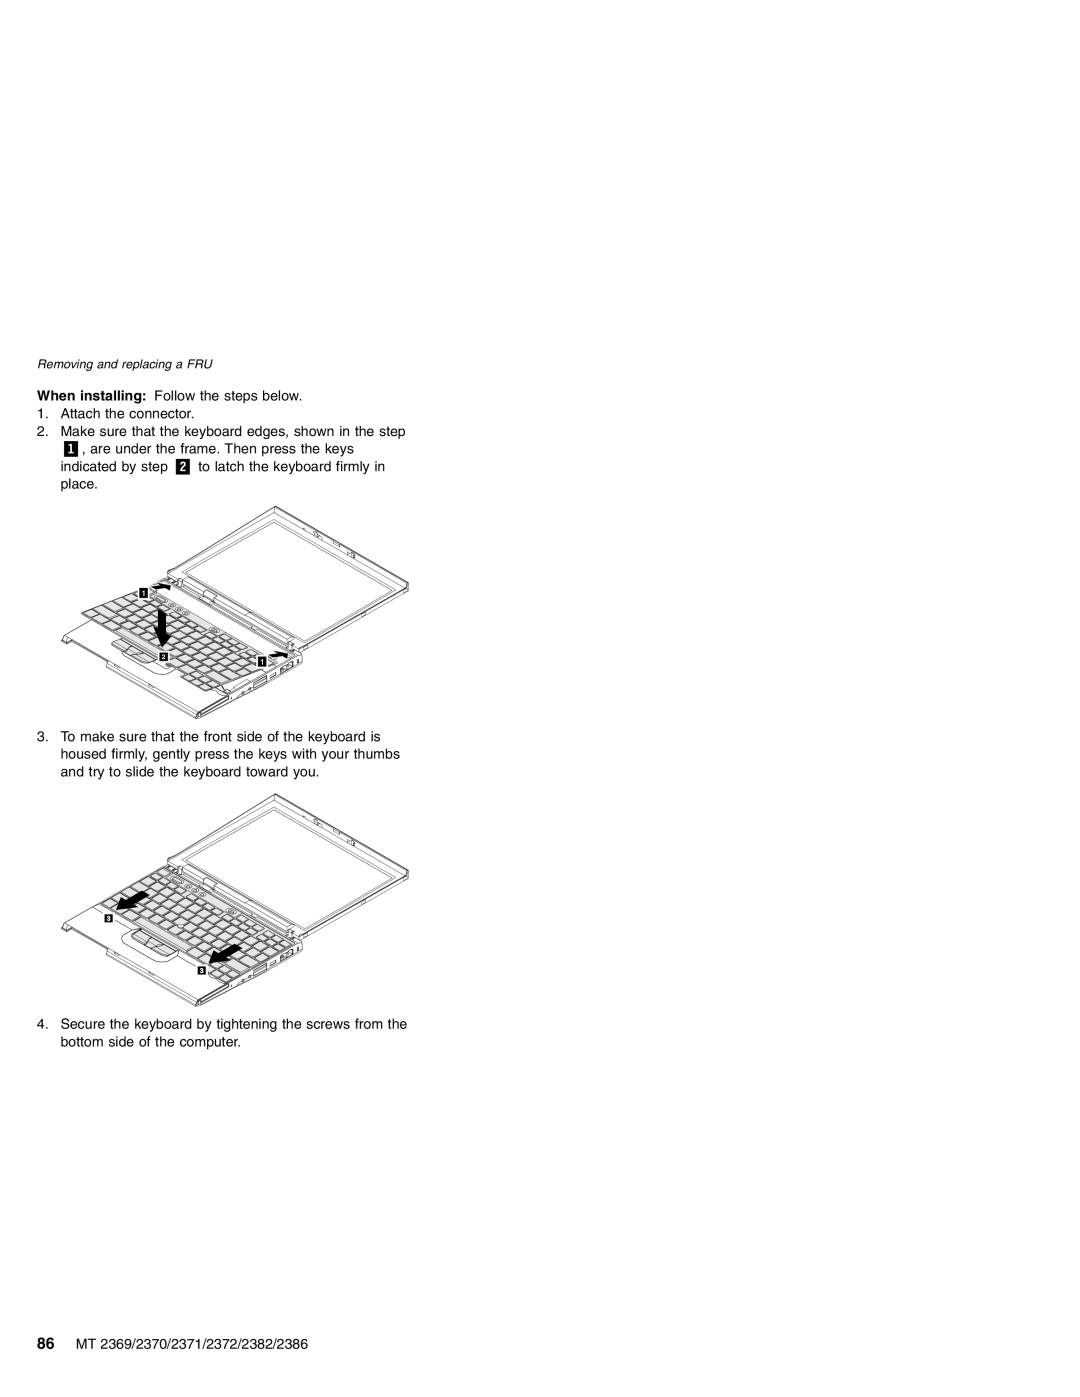 Lenovo MT 2369 manual When installing Follow the steps below 1. Attach the connector 